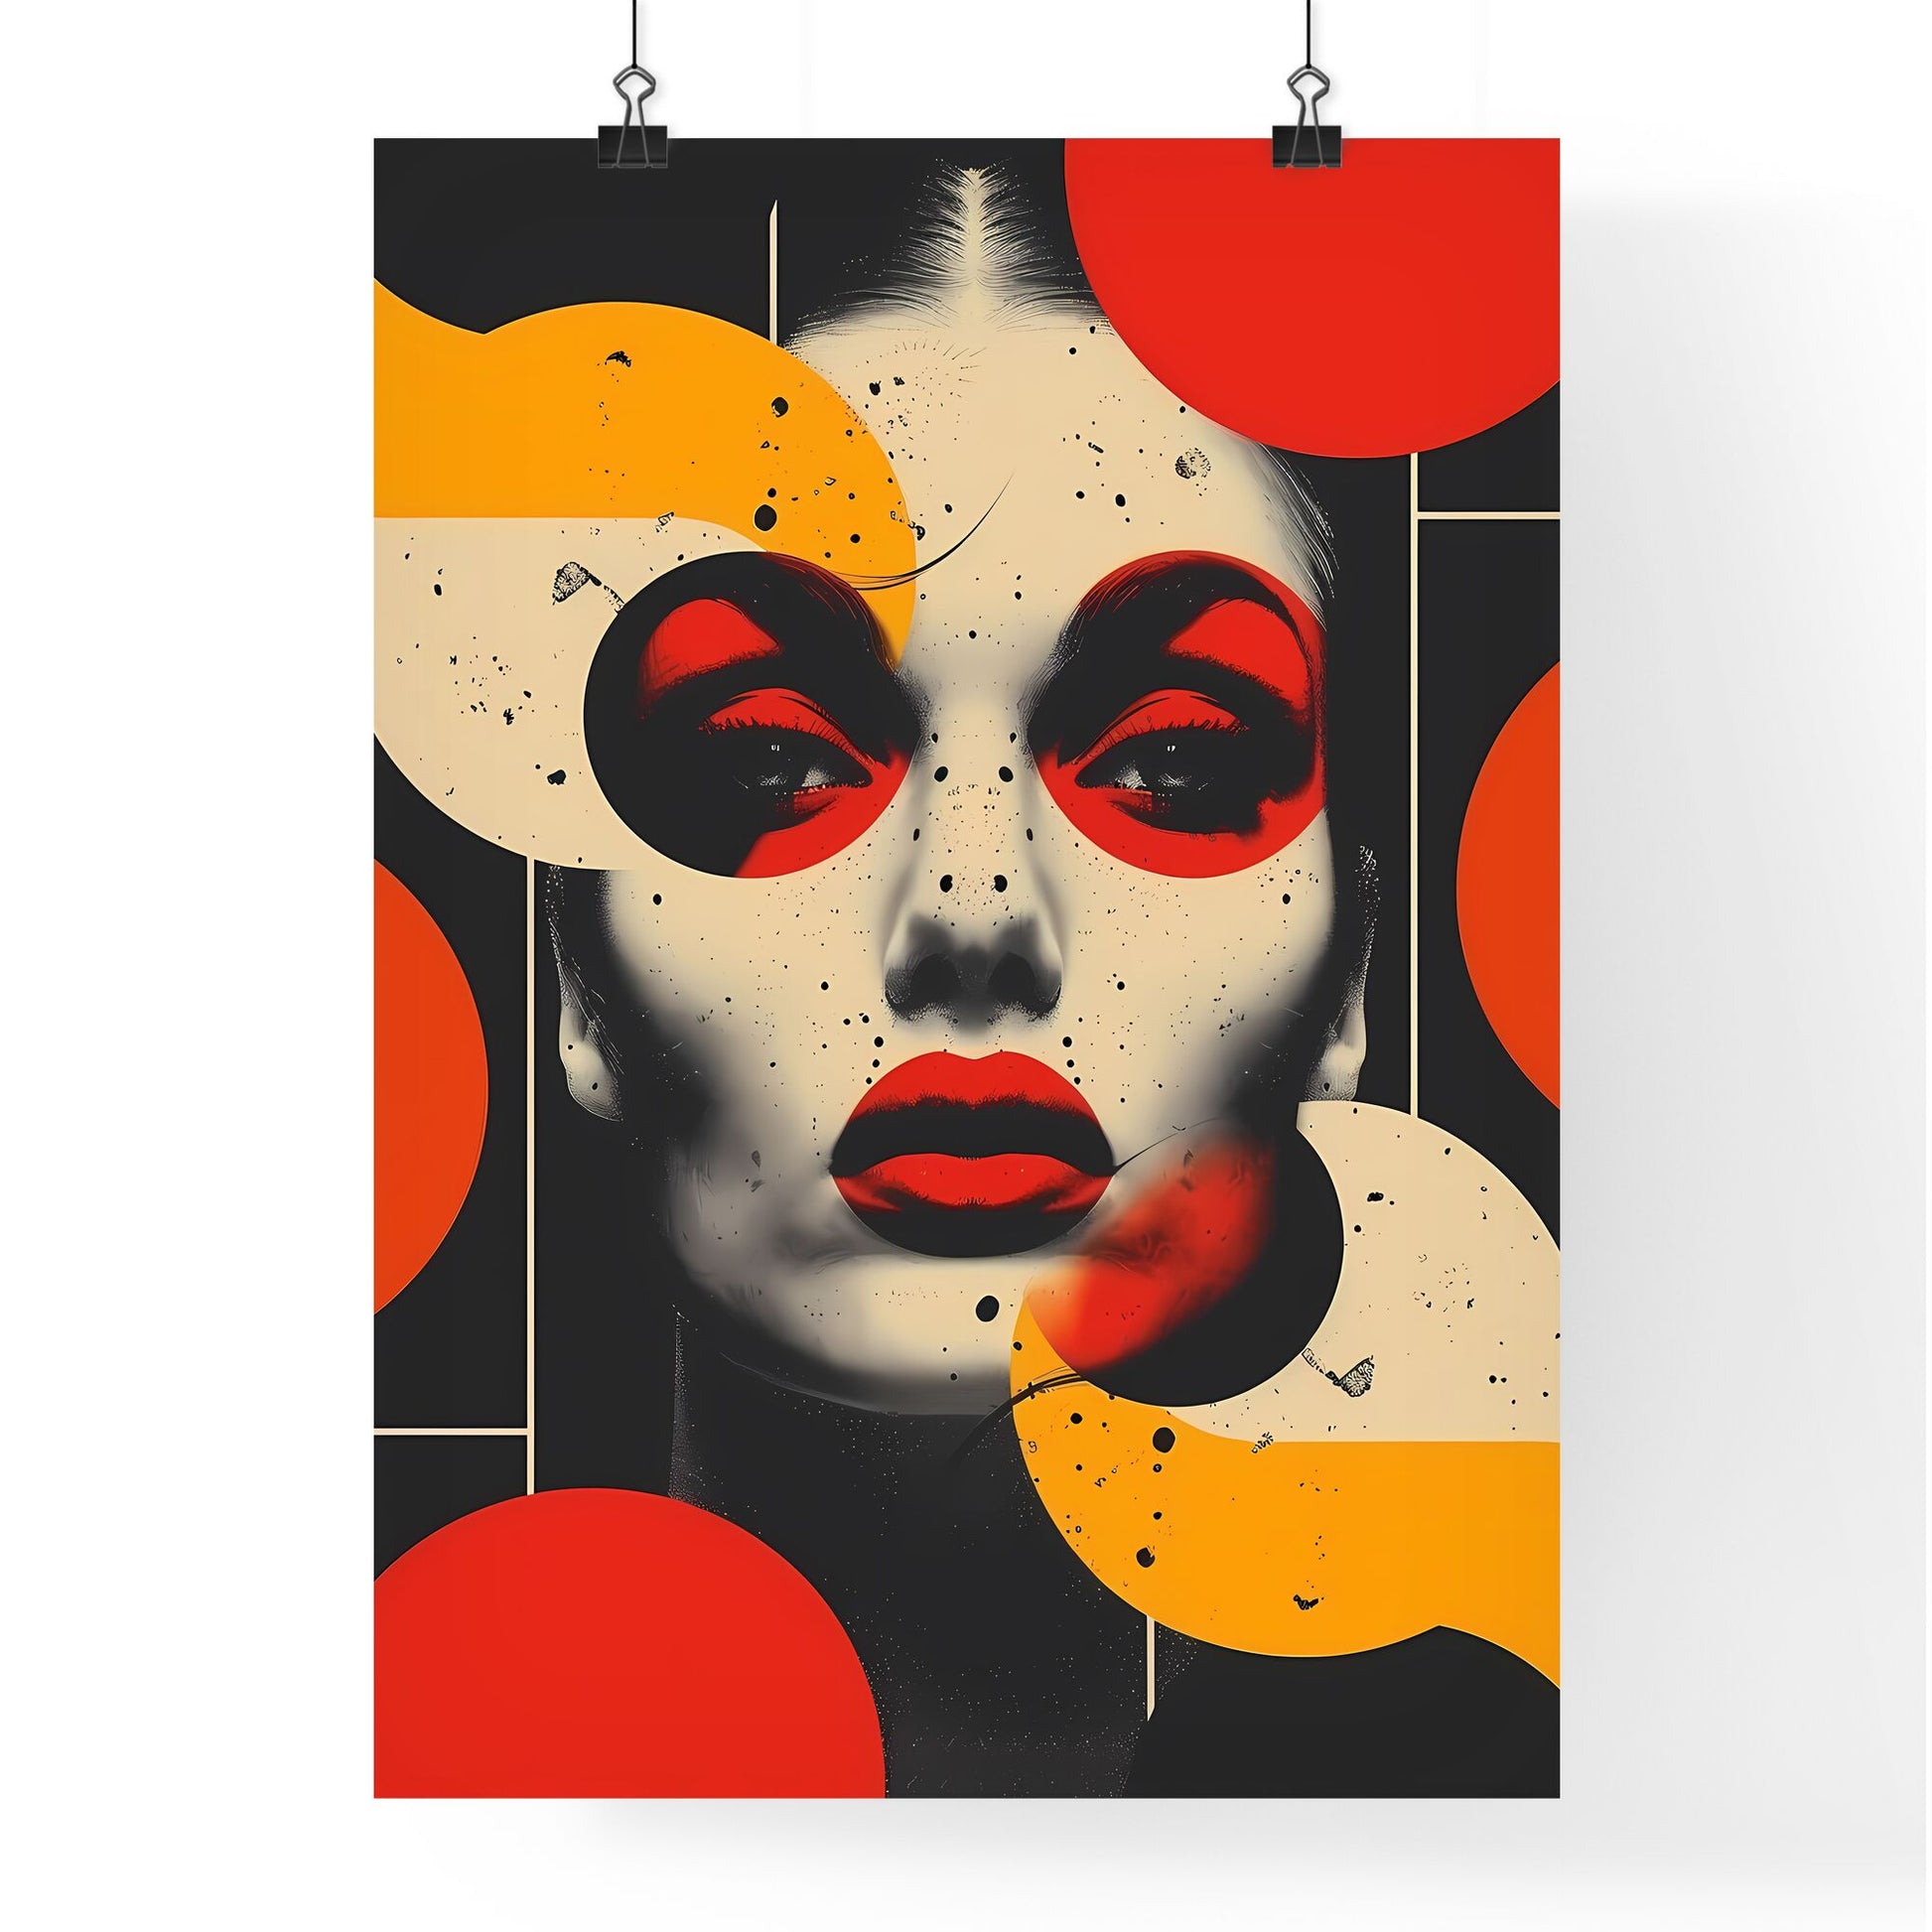 Striking Psychedelic Art Poster Embodies 1960s-1980s Design Aesthetics: Woman with Red Lips and Captivating Black and White Circles Default Title